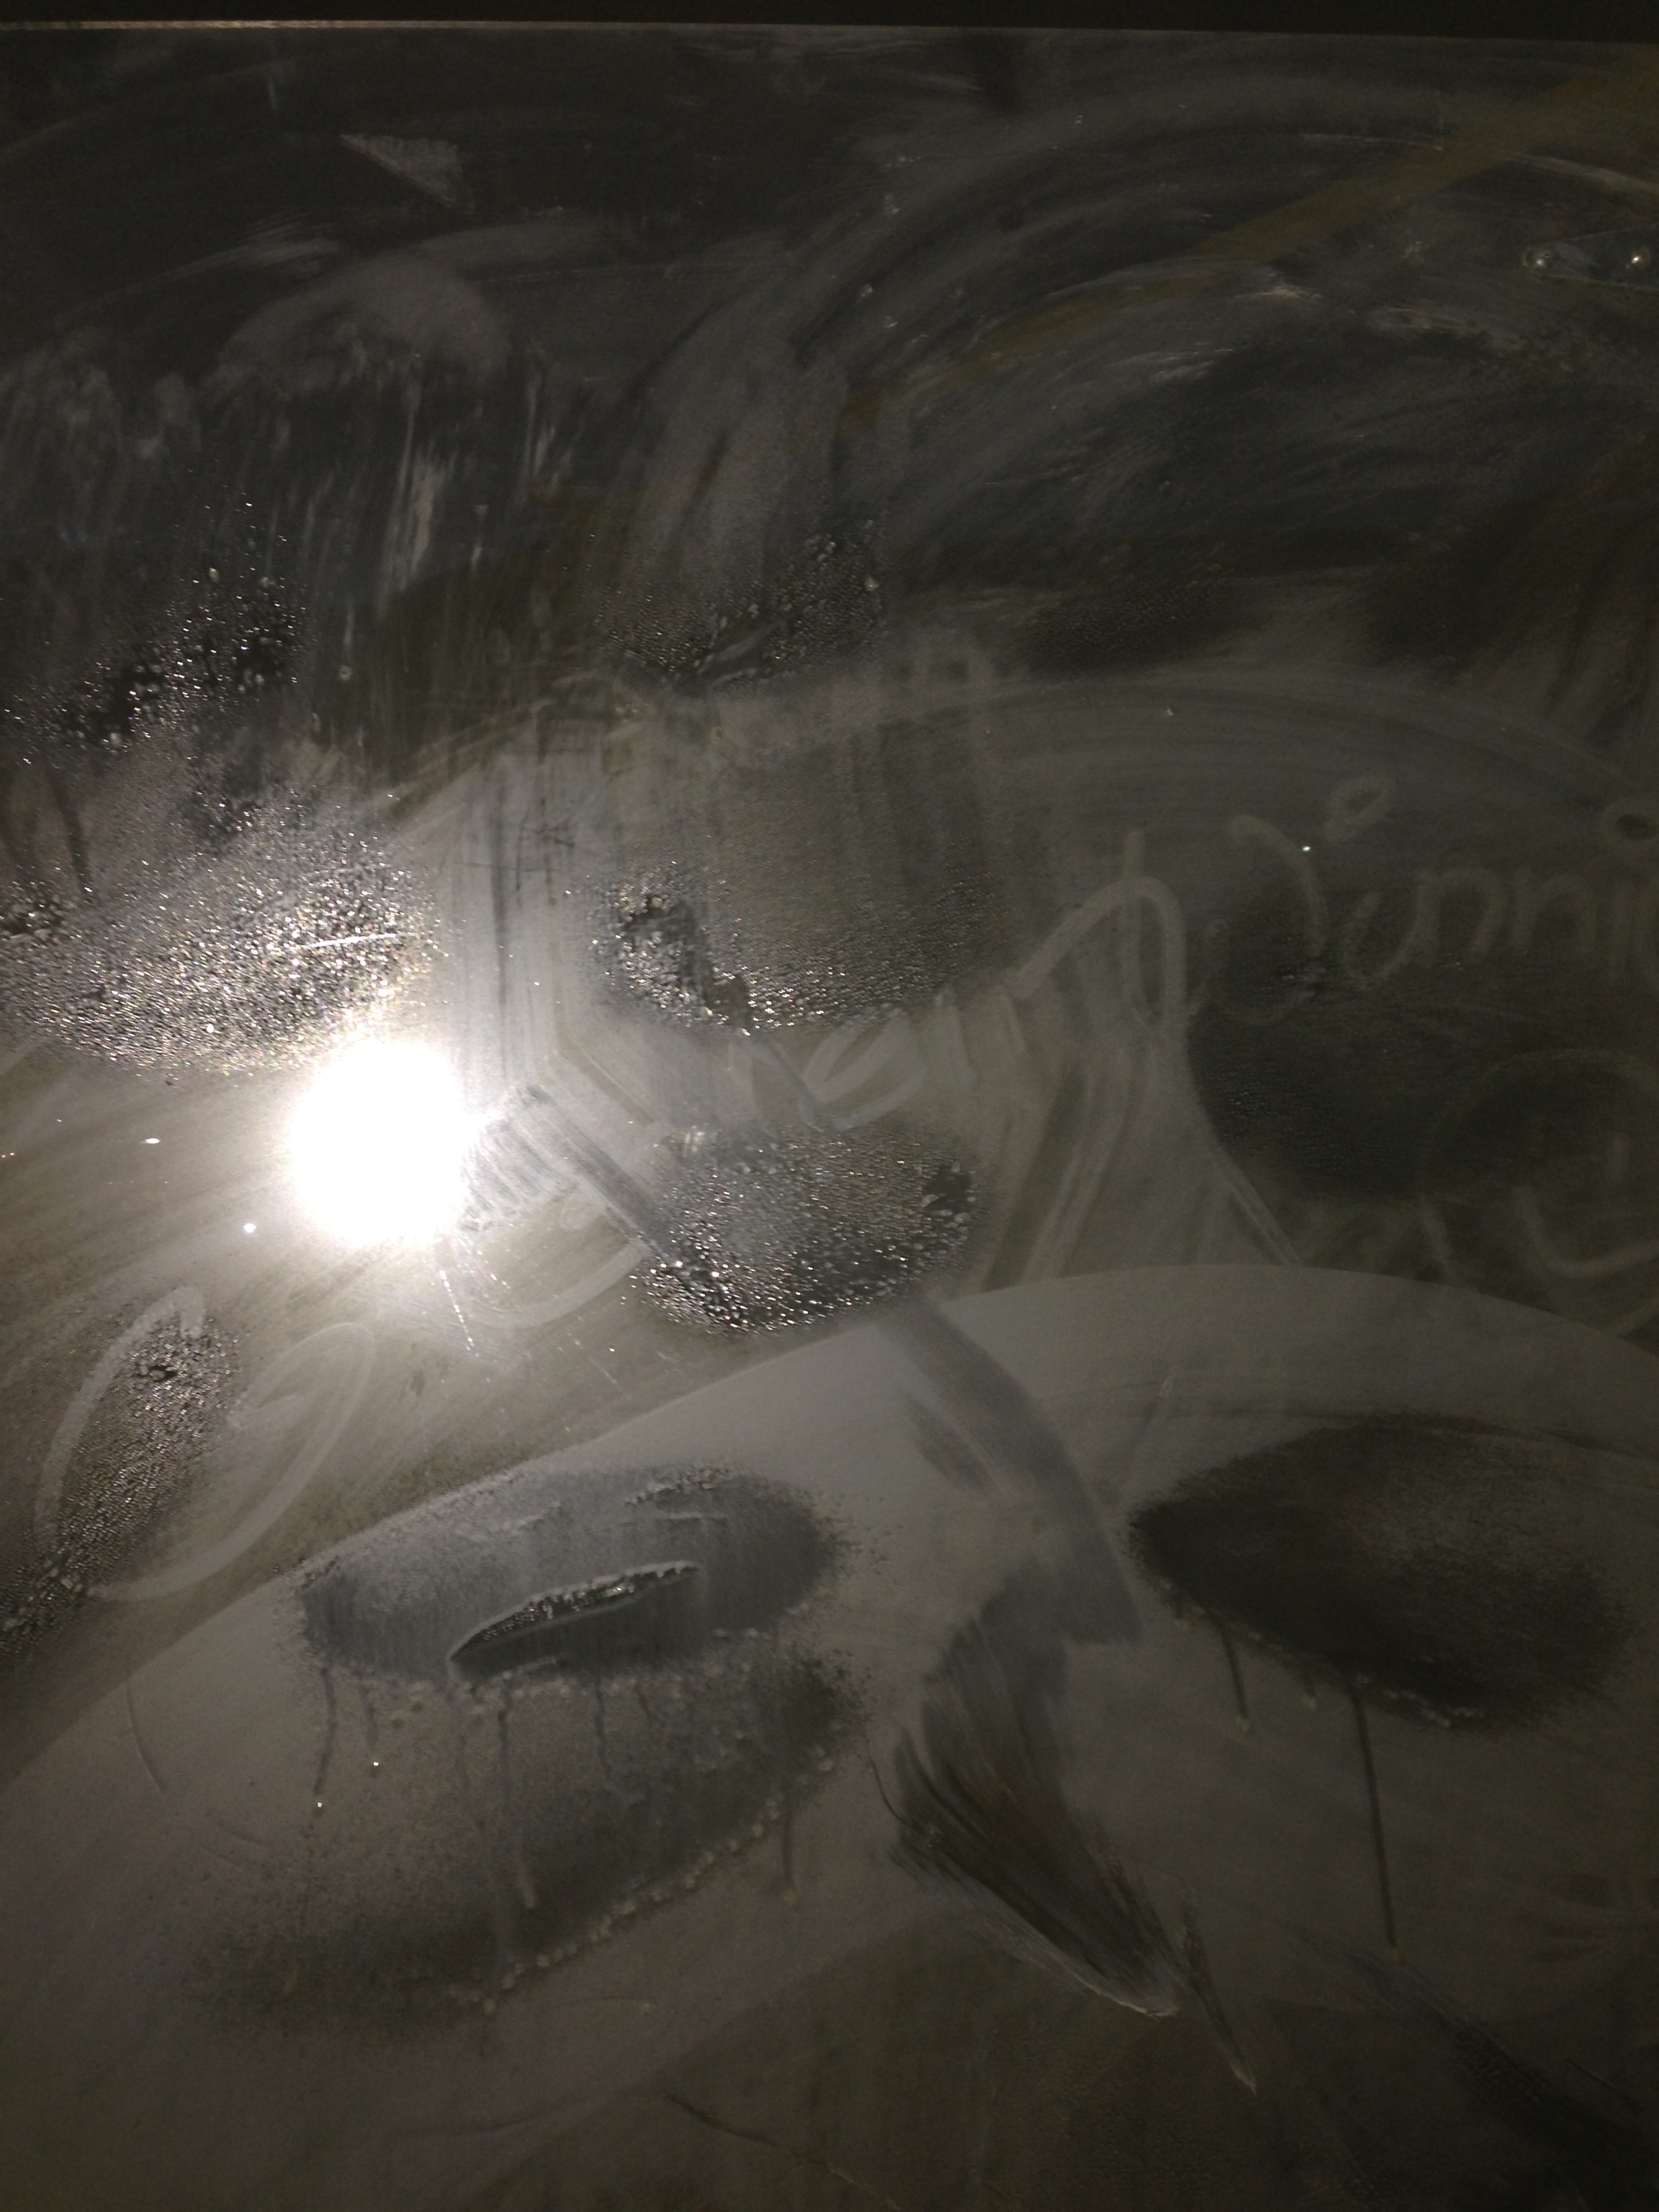 Some of the inscrutable things people draw on fiery, dusty mirrors.